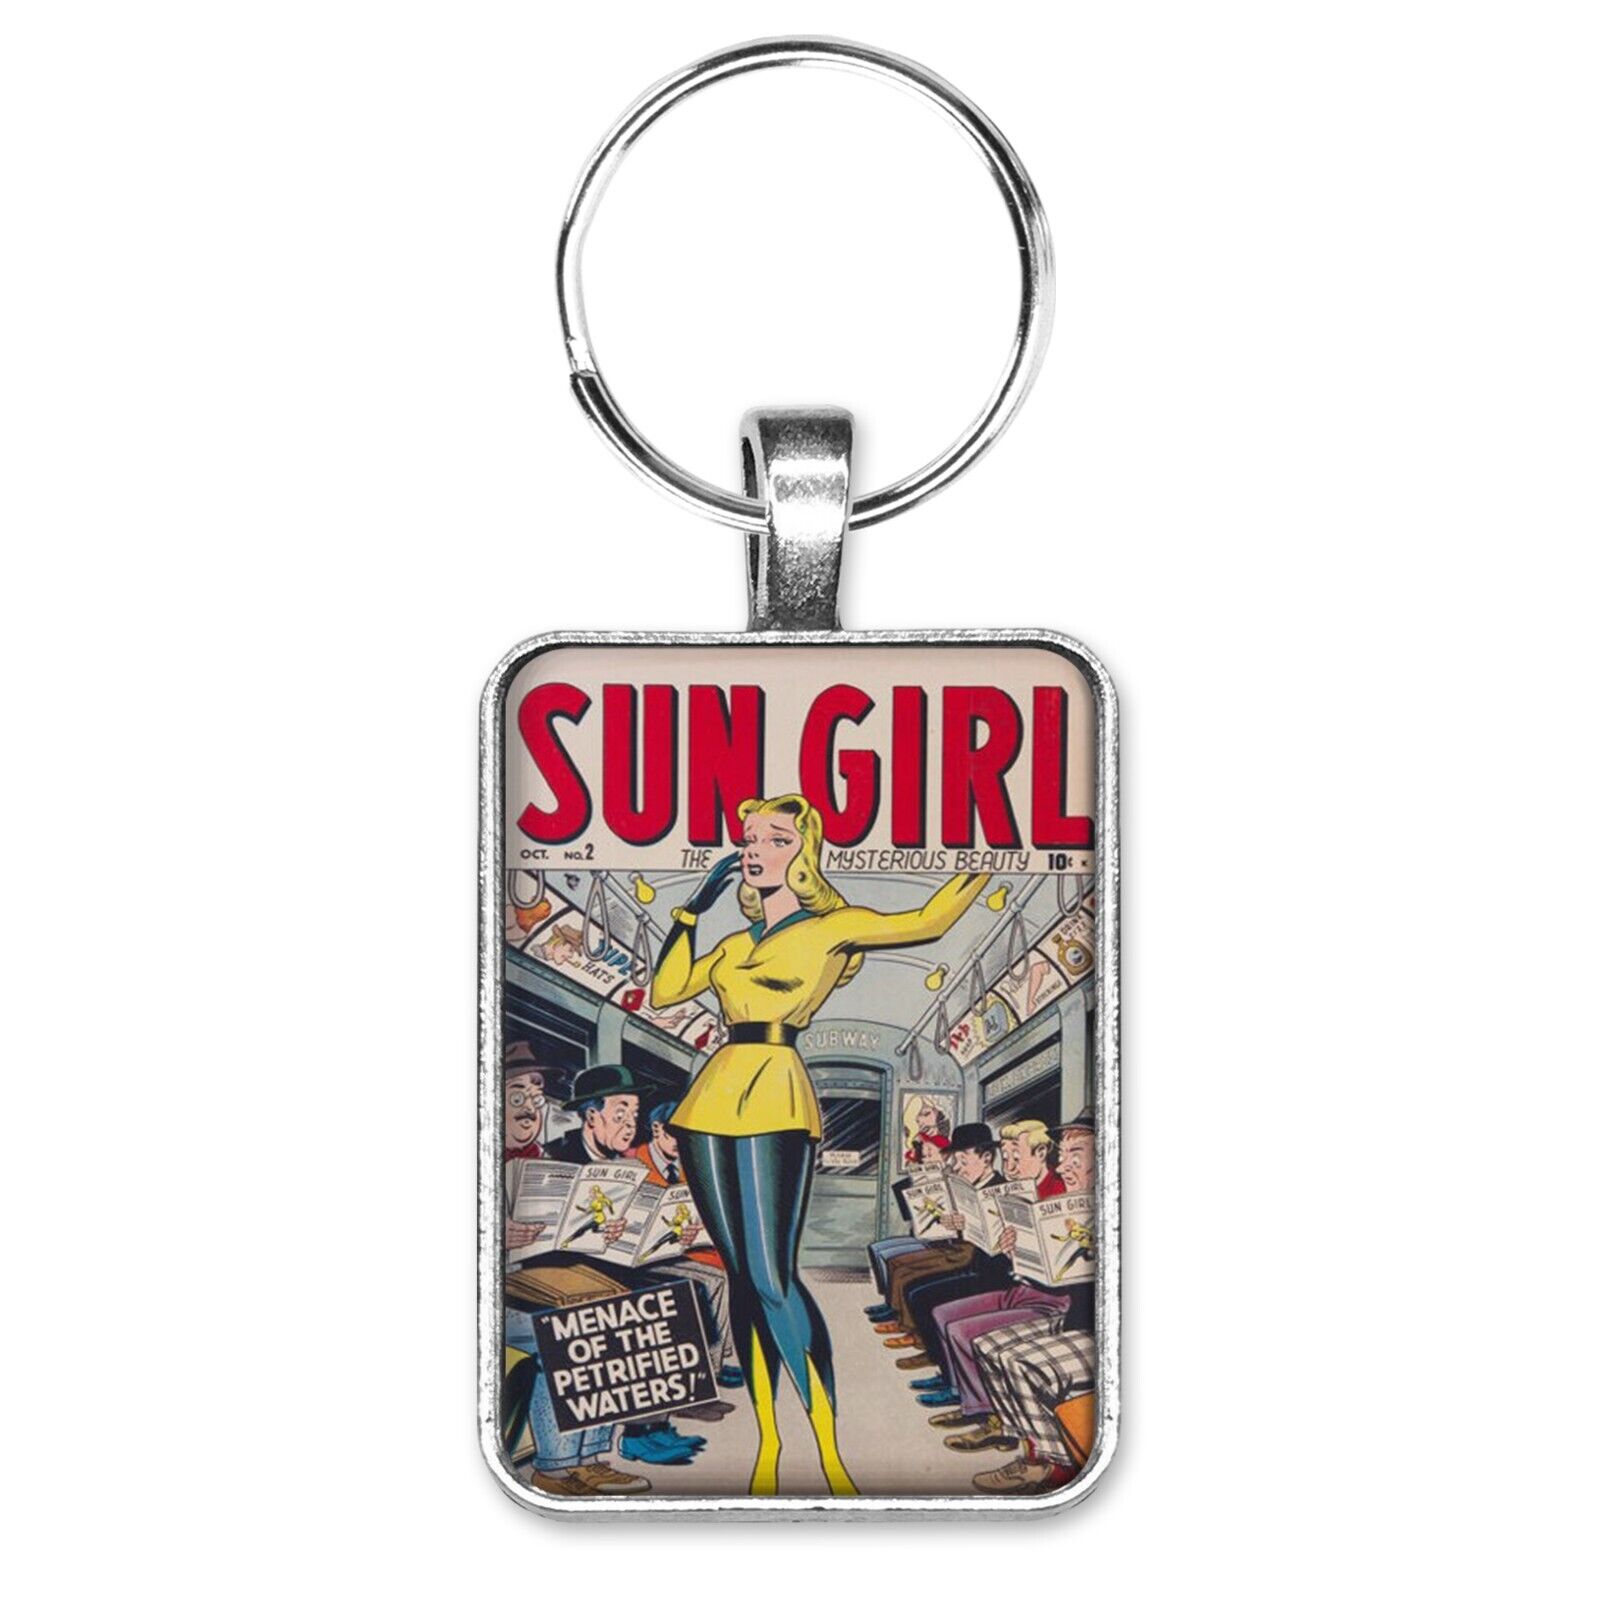 Sun Girl The Mysterious Beauty #2 Cover Key Ring or Necklace Classic Comic Book